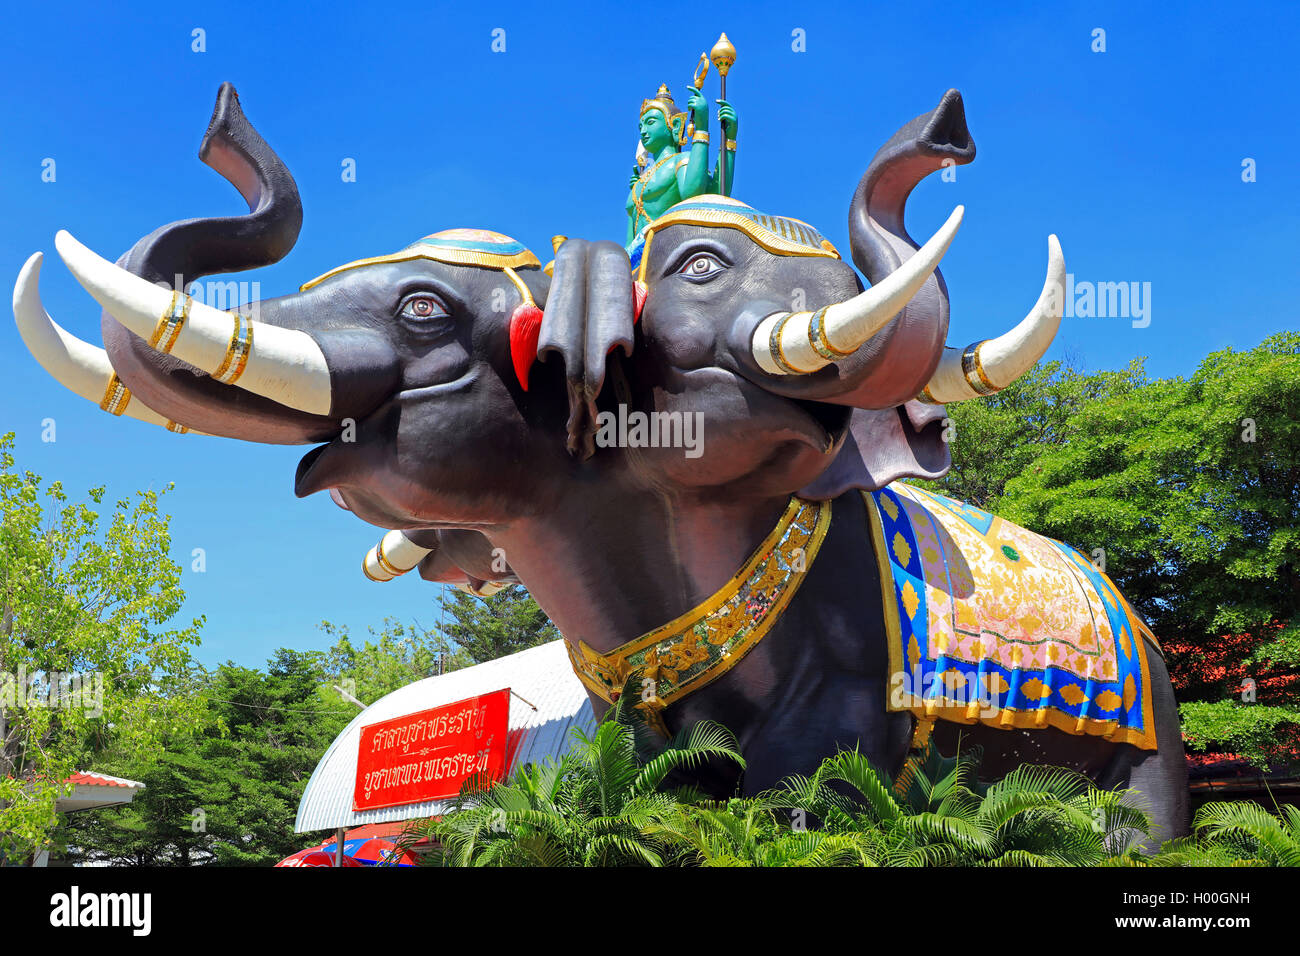 elephant statue with three heads and rider, Thailand, Chachoengsao Stock Photo